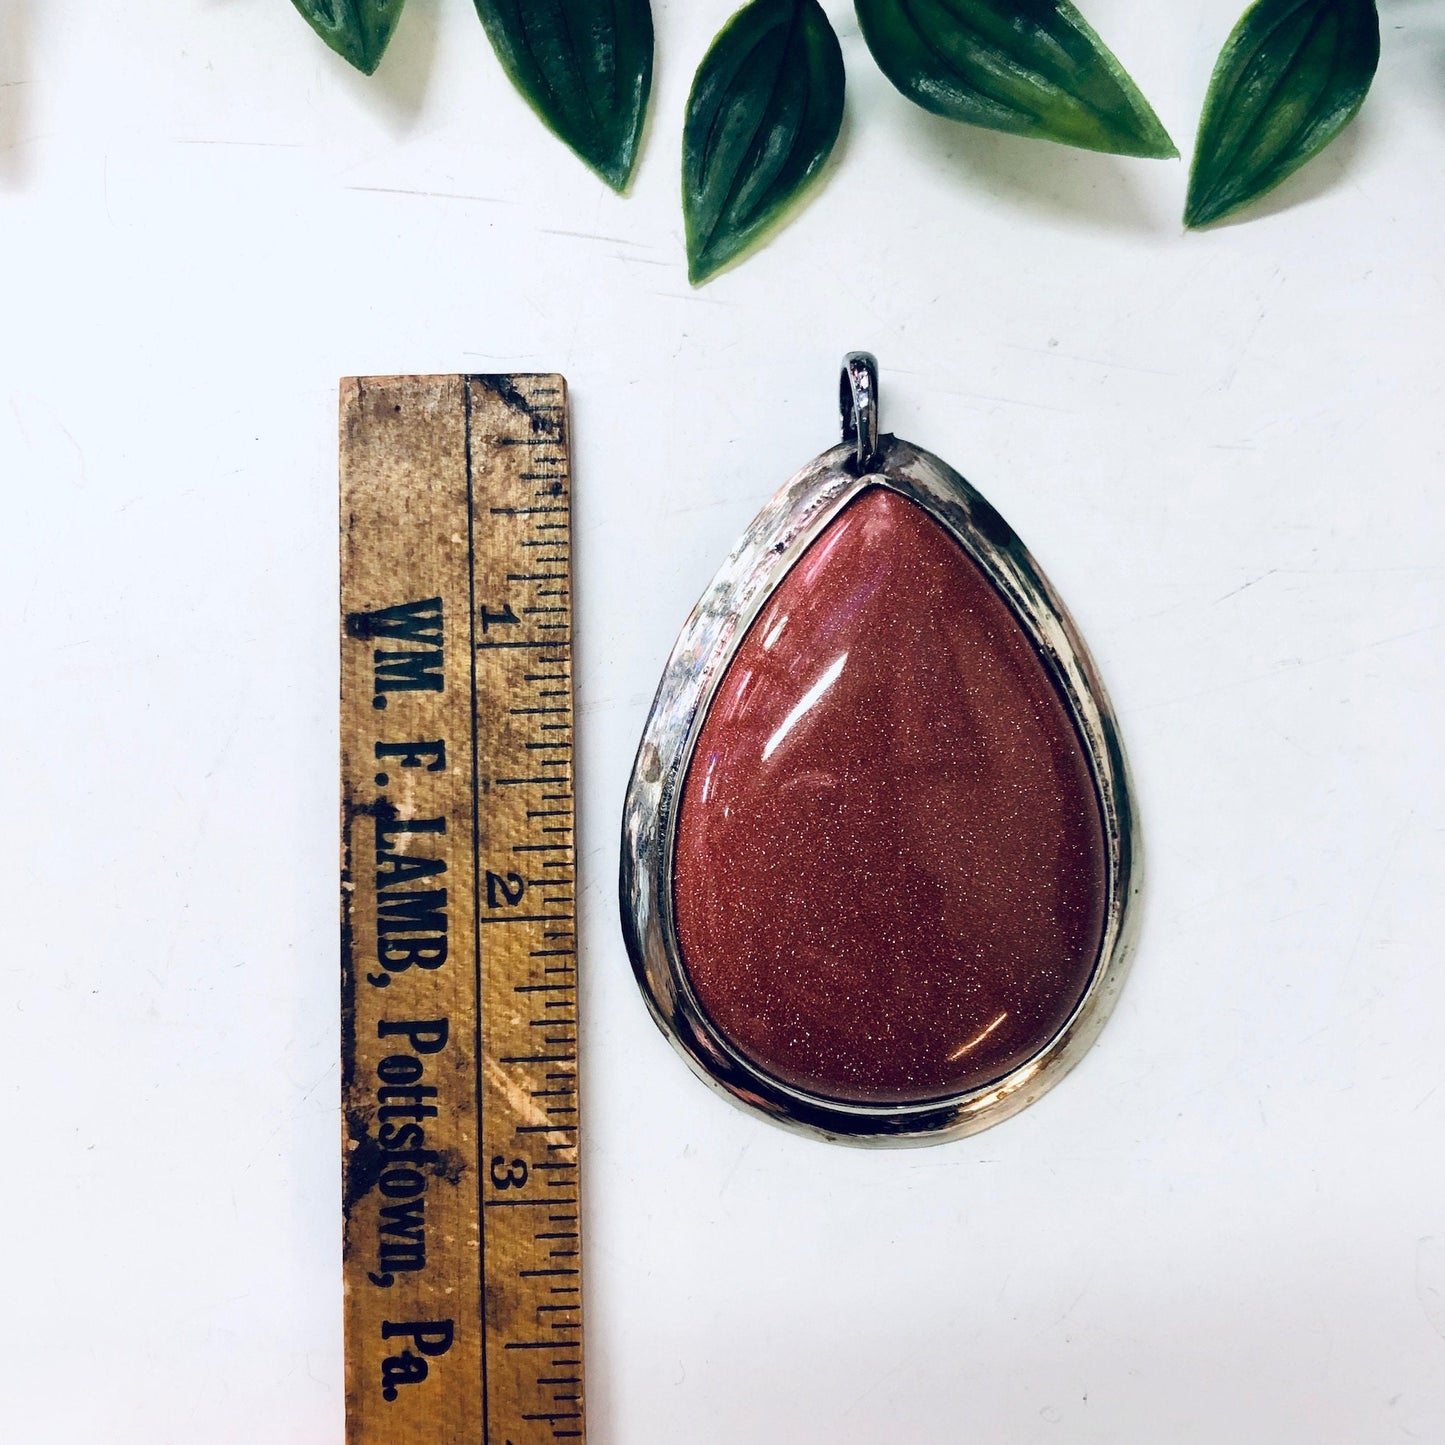 Vintage Druzy Quartz Pendant Necklace with Metal Setting, Sparkly Polished Stone Statement Jewelry with Ruler for Scale